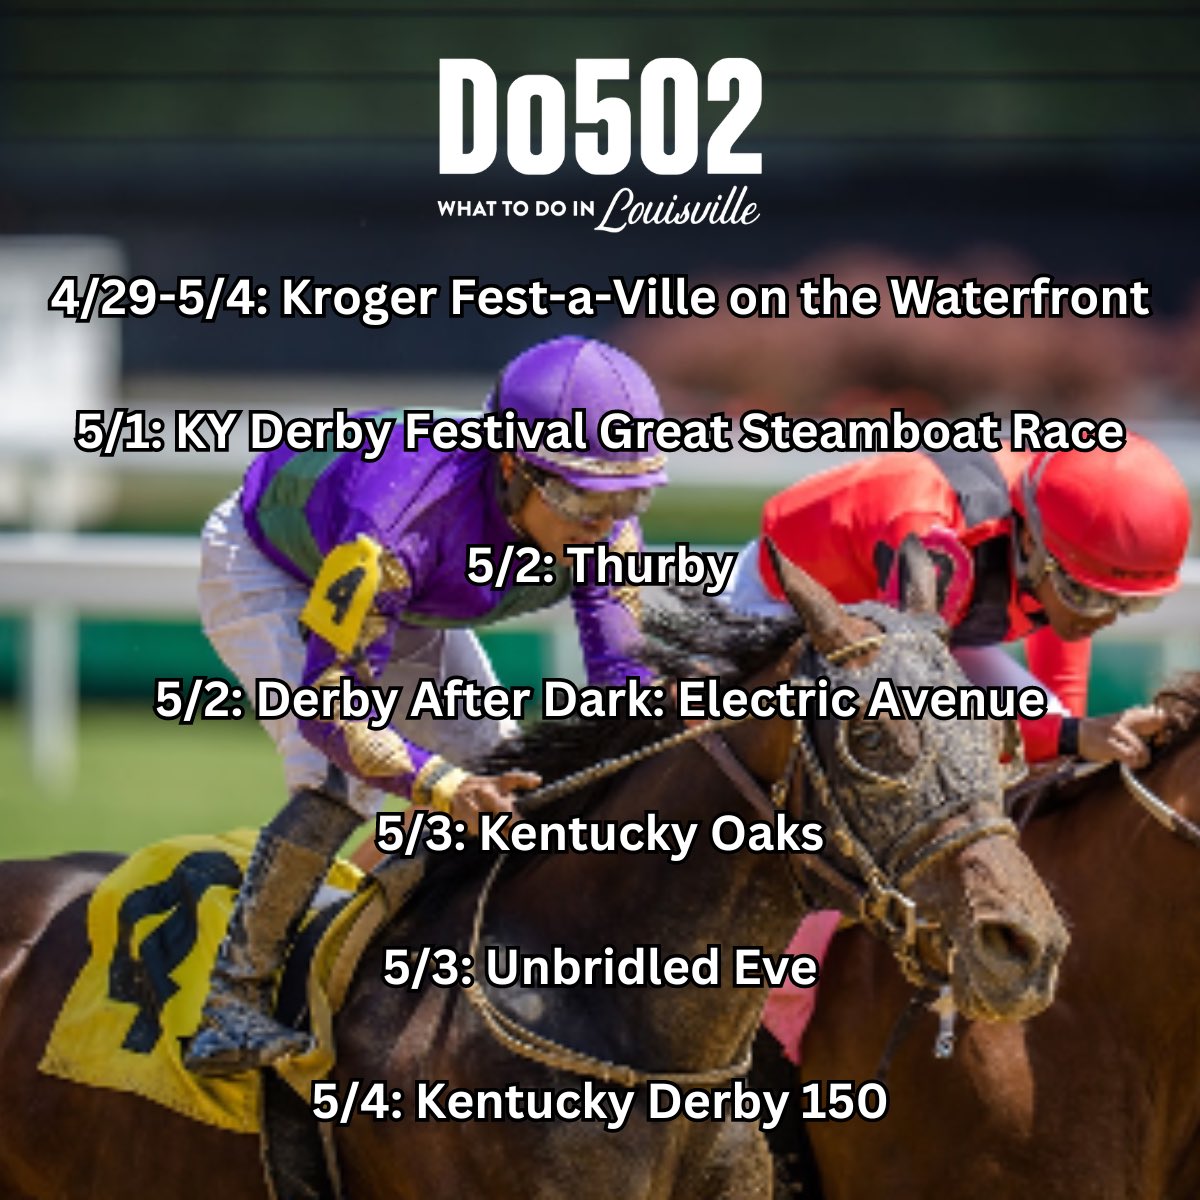 It’s Derby Week! #WhatToDoInThe502 #Do502 #DoMORE #DoStuff #WhatToDo #Derby #KentuckyDerby #DerbyWeek
📸: churchilldowns.com